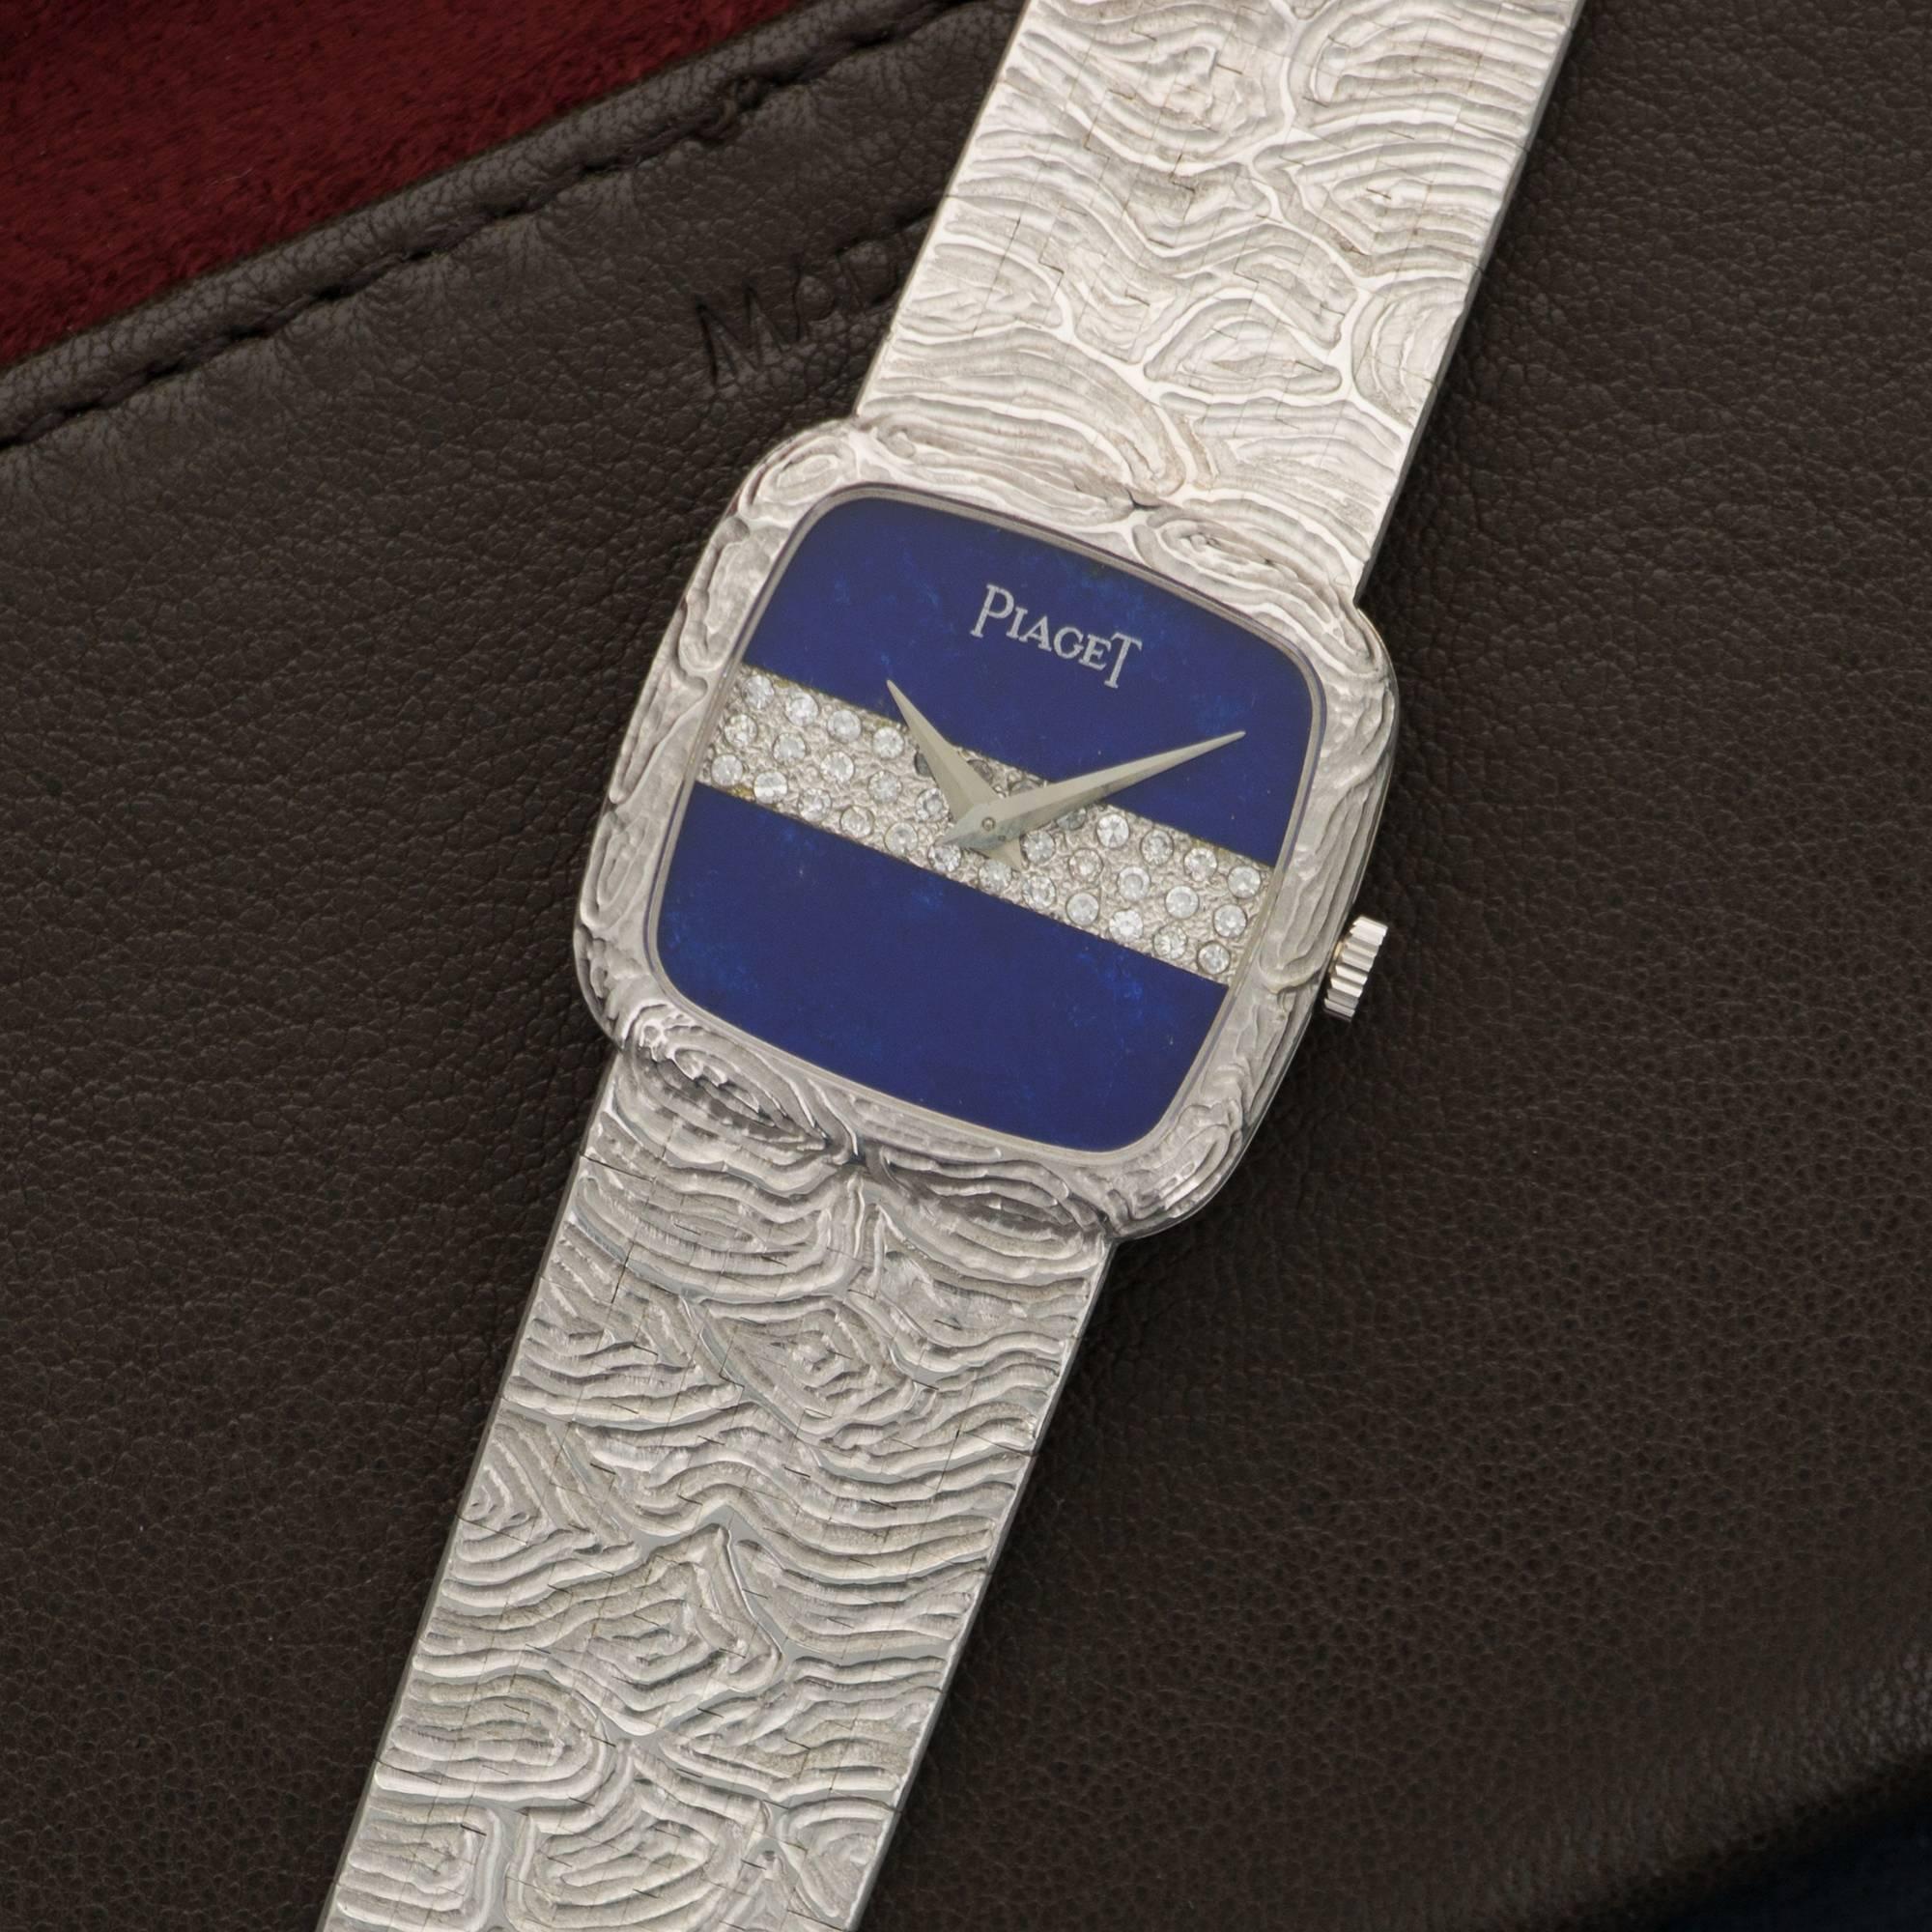 An 18k White Gold Wristwatch with Lapis Lazuli and Pave Diamonds. Model 9902. Circa 1970's. Case measures 23mm. Bracelet Length is 185mm. 